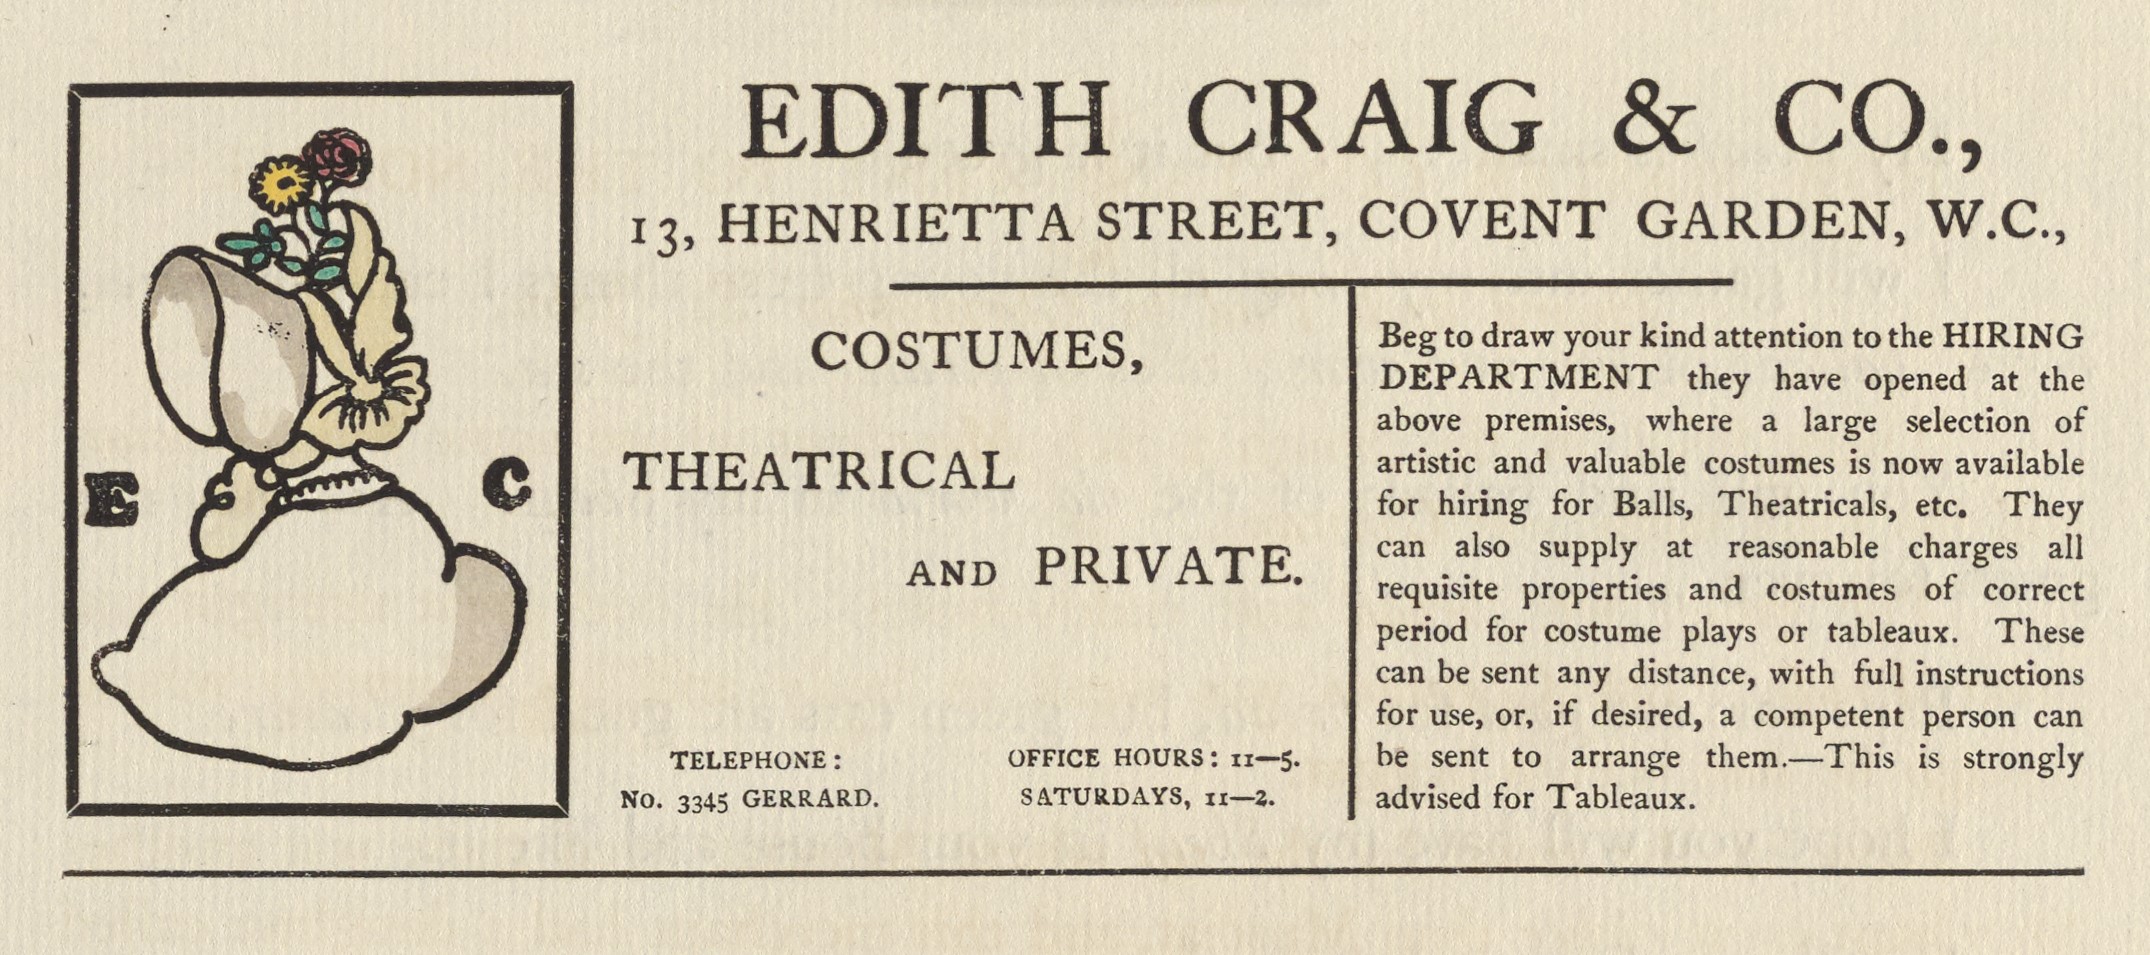 The illustrated advertisement occupies the top third of the otherwise blank page. The ad is titled “Edith Craig & Co.,” in a large serif font. Below the title, an address is printed: “13, Henrietta Street, Covent Garden, W.C.” To the left of the text is a small, coloured illustration with a black rectangular frame. It depicts a woman from the shoulders up, in profile, wearing a bonnet that hides her face. The bonnet is decorated with a pale yellow ribbon on the side and has two flowers with green leaves – a yellow daisy and a red rose – emerging from its top. The bonnet and the edge of her dress are coloured grey. The initials “E” and “C” are positioned to either side of the woman, in a heavy serif font. The text of the advertisement is divided into two columns beneath the title and address, and reads “Costumes, theatrical and private. Telephone: No. 3345 Gerrard. Office hours: 11-5. Saturdays, 11-2. Beg to draw your attention to the HIRING DEPARTMENT they have opened at the above premises, where a large selection of artistic and valuable costumes is now available for hiring for Balls, Theatricals, etc. They can also supply at reasonable charges all requisite properties and costumes of correct period for costume plays or tableaux. These can be sent any distance, with full instructions for use, or, if desired, a competent person can be sent to arrange them.—This is strongly advised for Tableaux.”